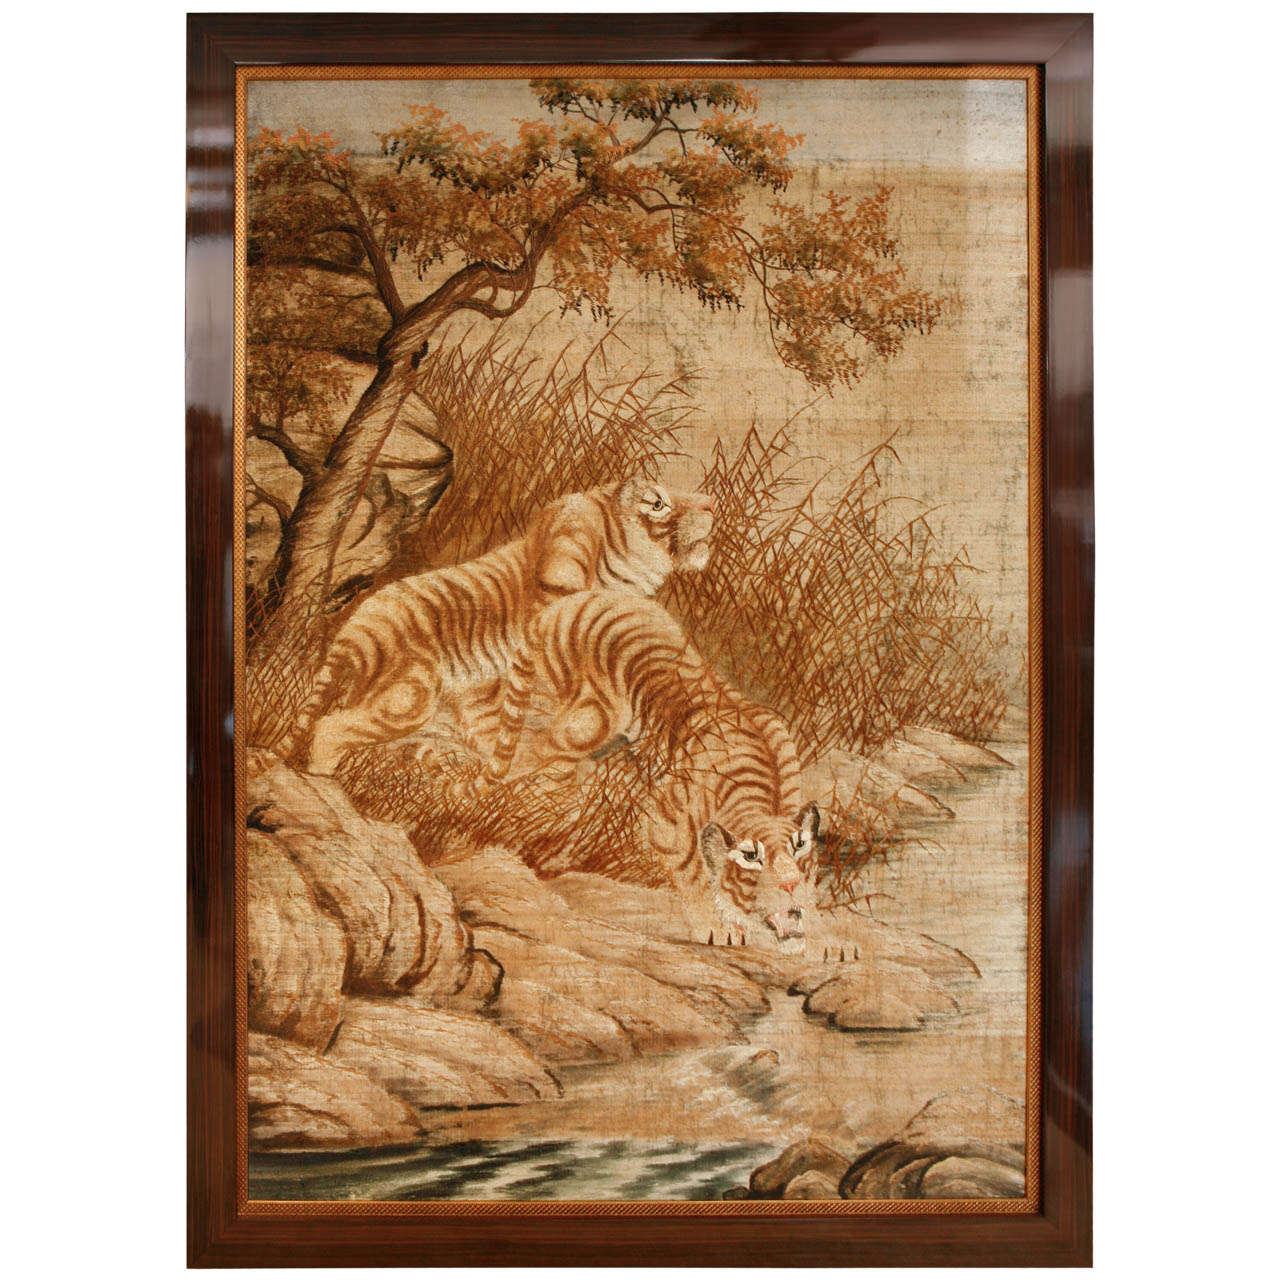 Oversized Pair of Tigers Tapestry